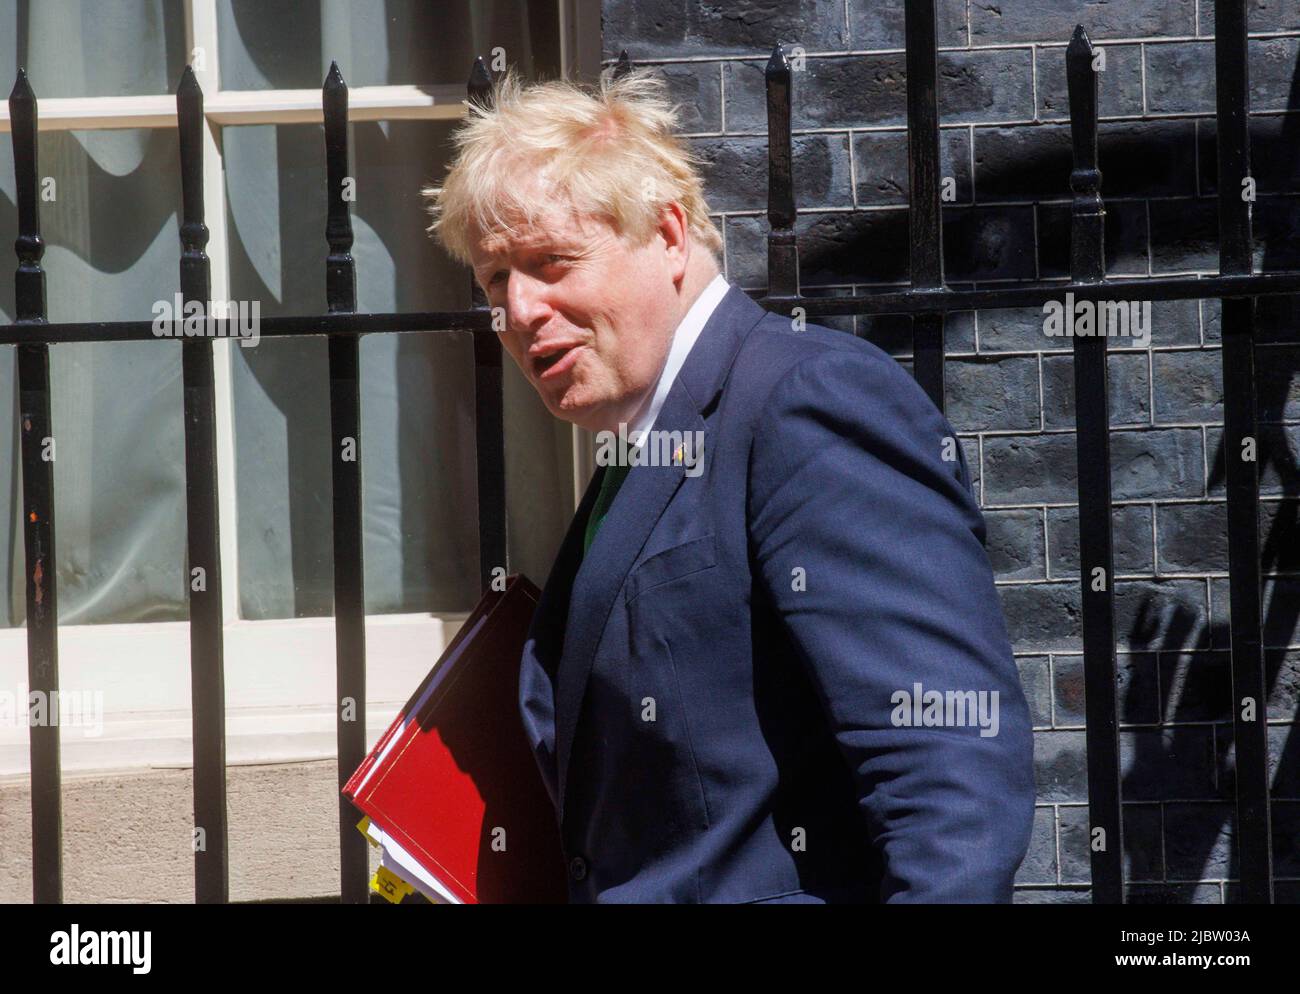 London, UK. 8th June, 2022. Prime Minister of the United Kingdom, Boris Johnson, leaves Number 10 in Downing Street. He heads to the House of Commons for Prime Ministers Questions. He faces interrogation by Sir keir Starmer over the recent Vote of No confidence in whiuch 148 of his own party members, voted against him. This is 41% of his own Party. Credit: Karl Black/Alamy Live News Stock Photo